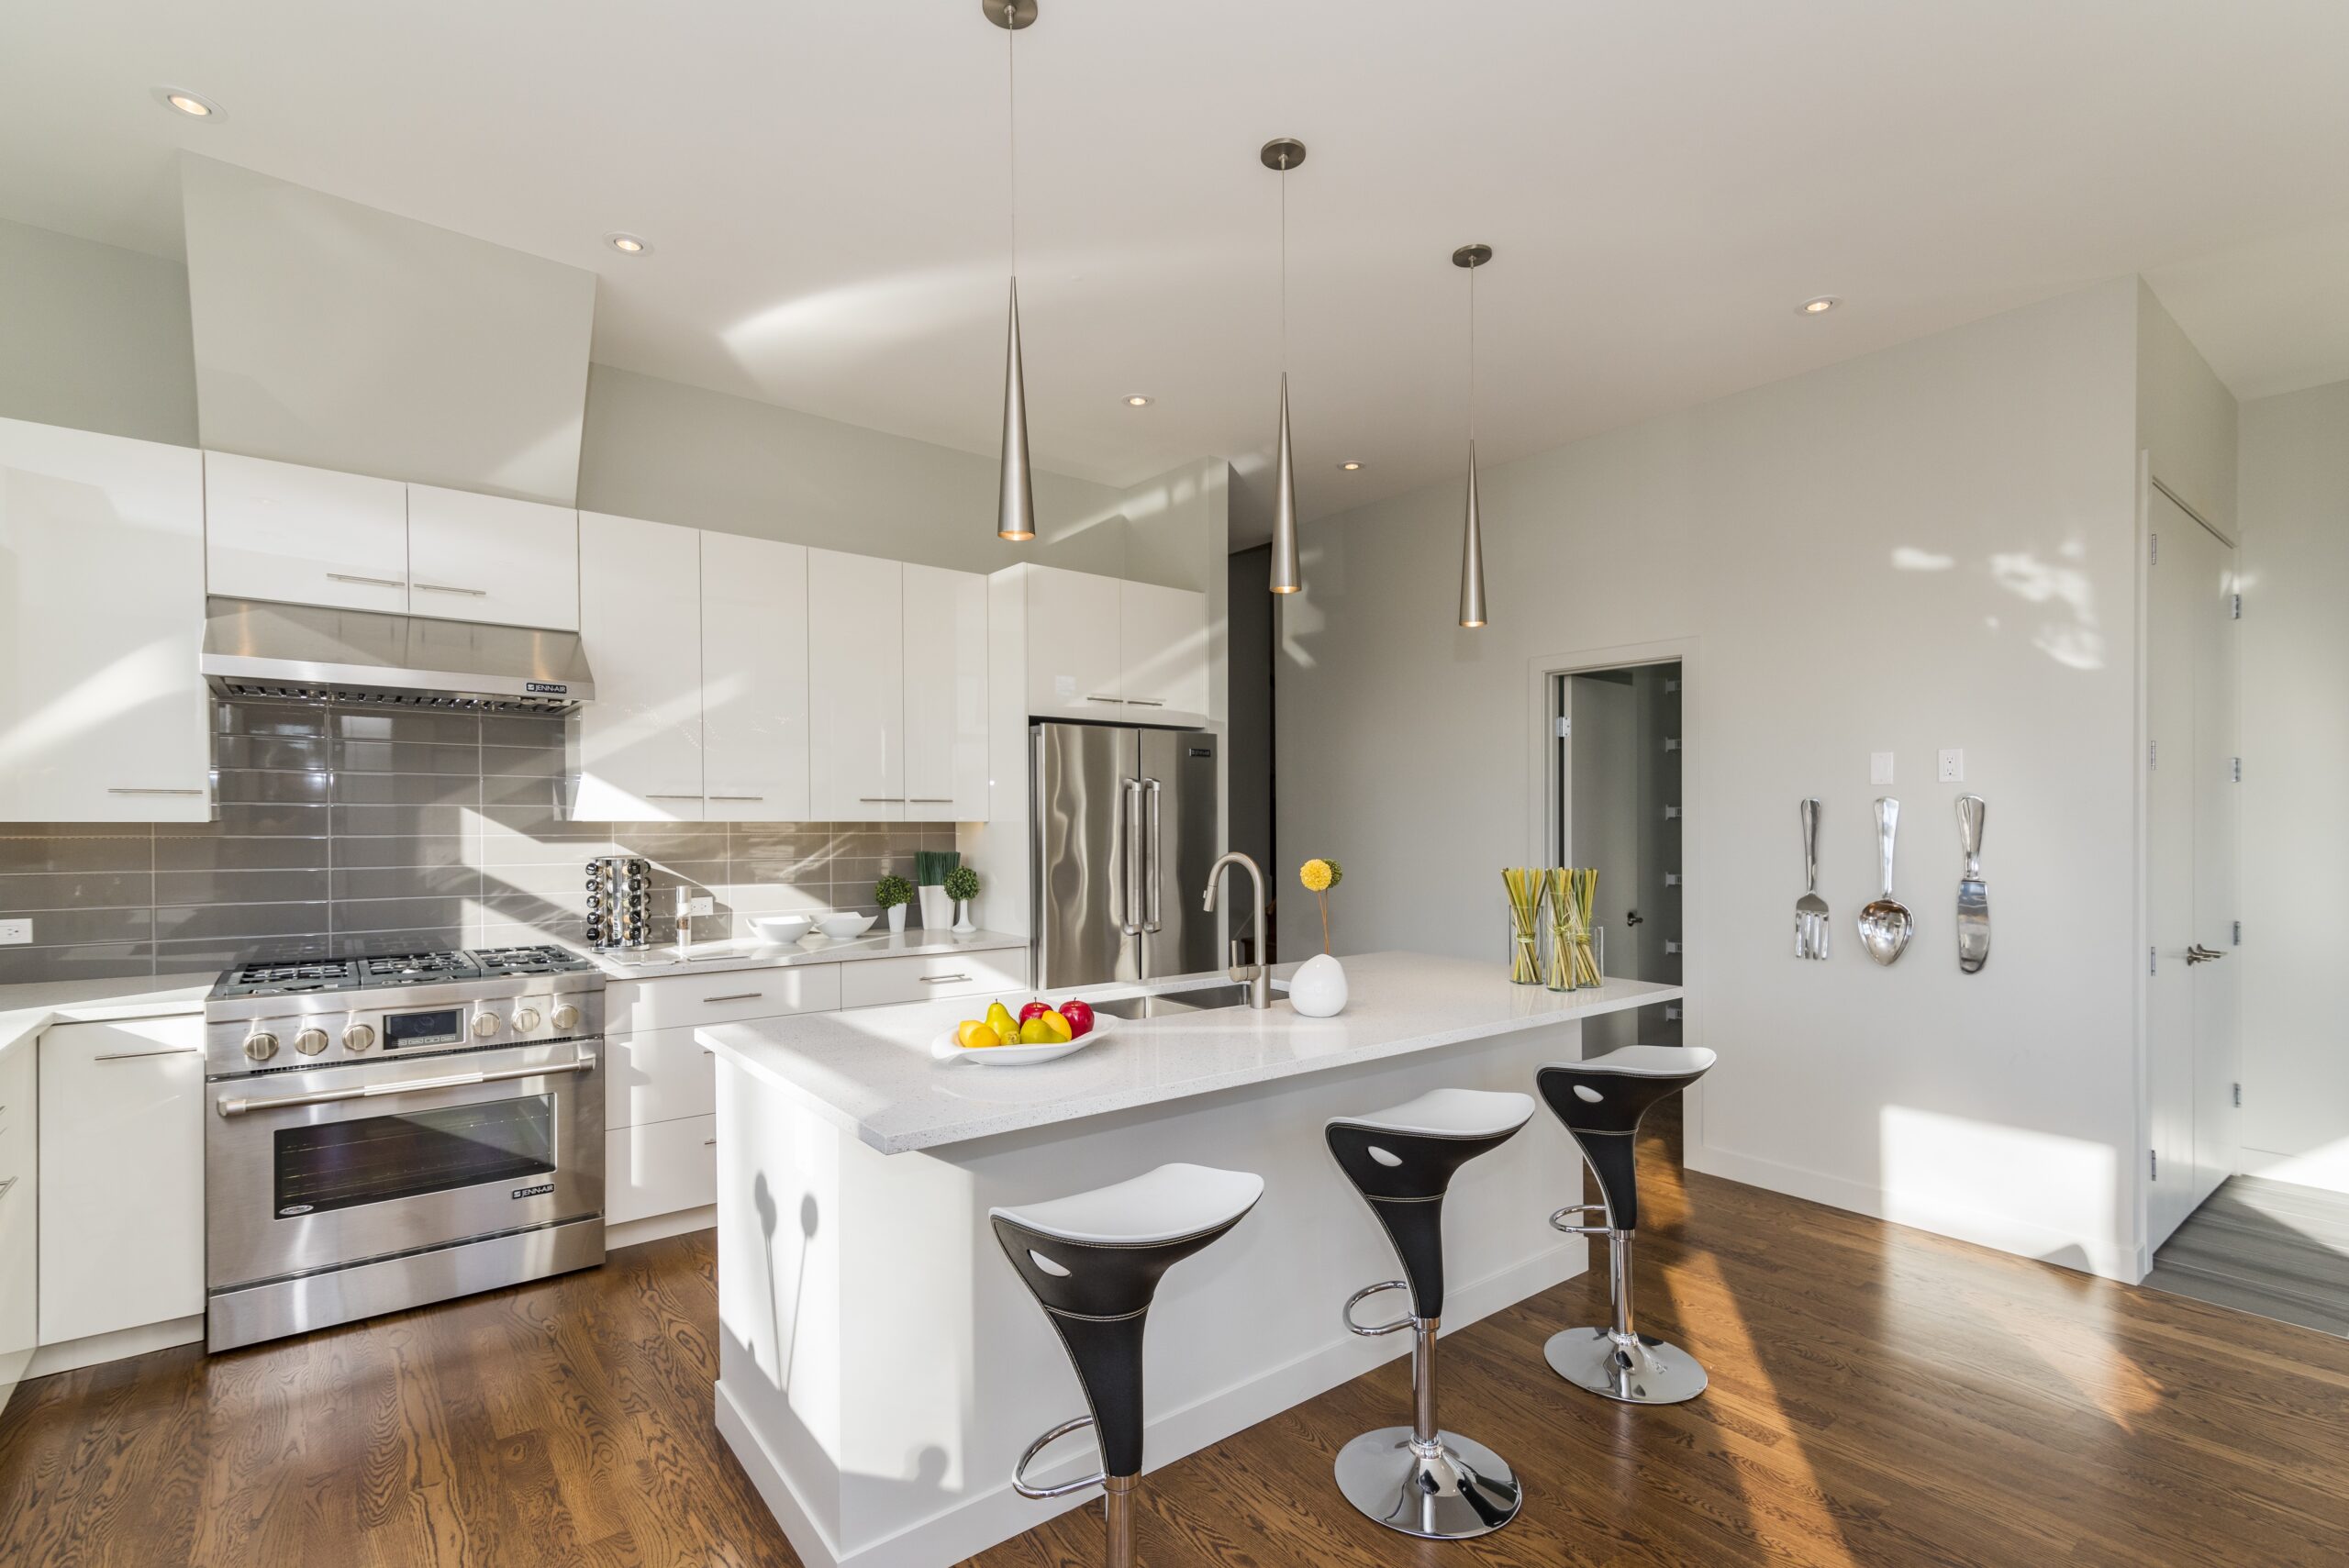 Maximizing small spaces: tips for kitchen remodeling in Houston apartments